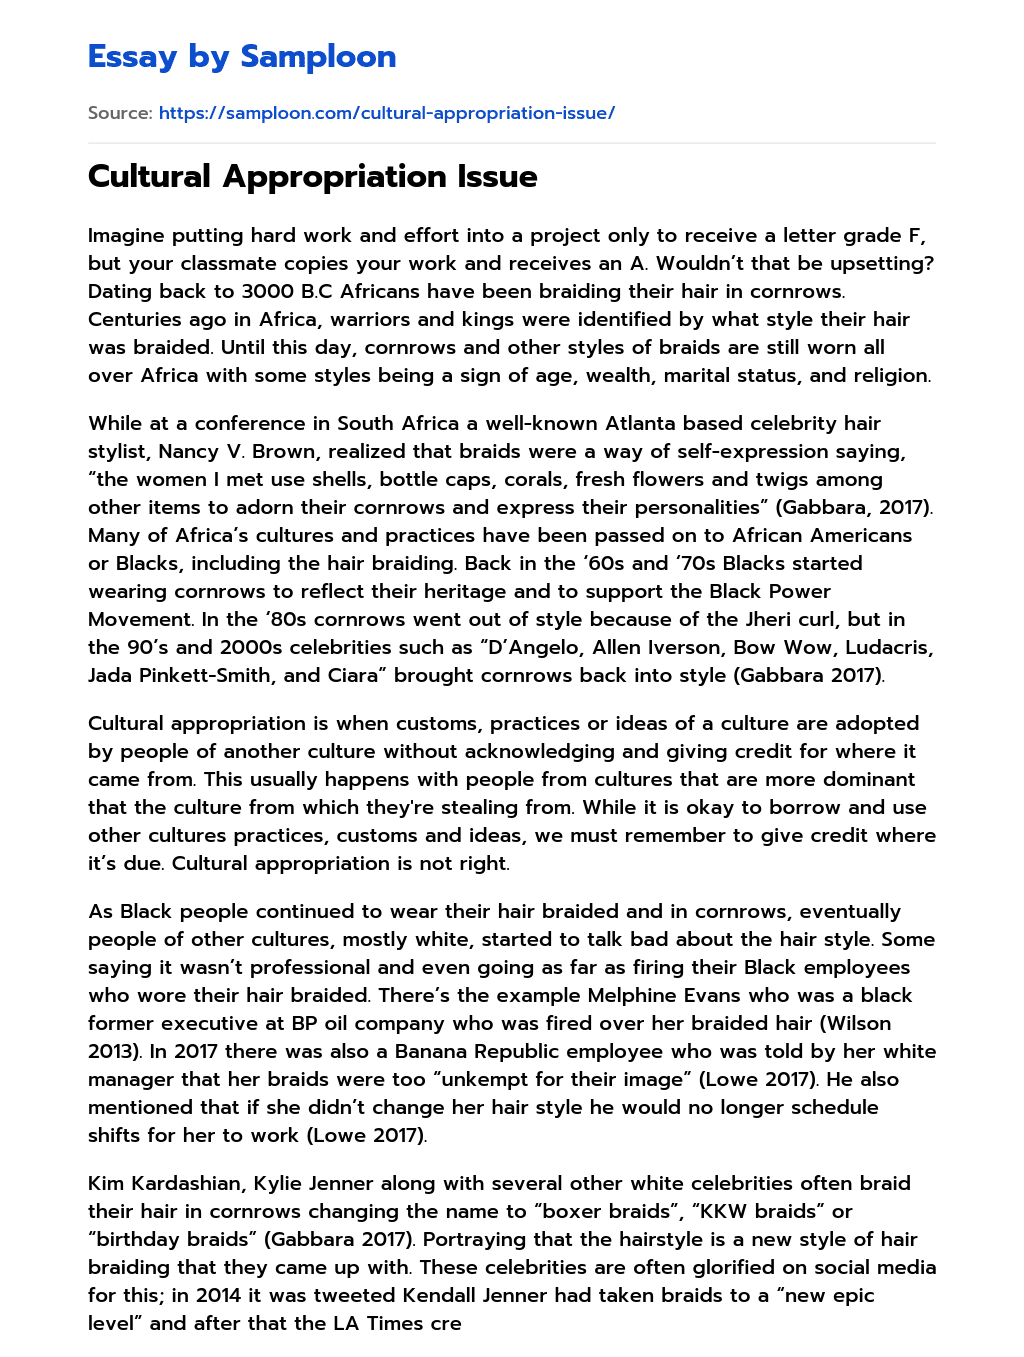 Cultural Appropriation Issue essay